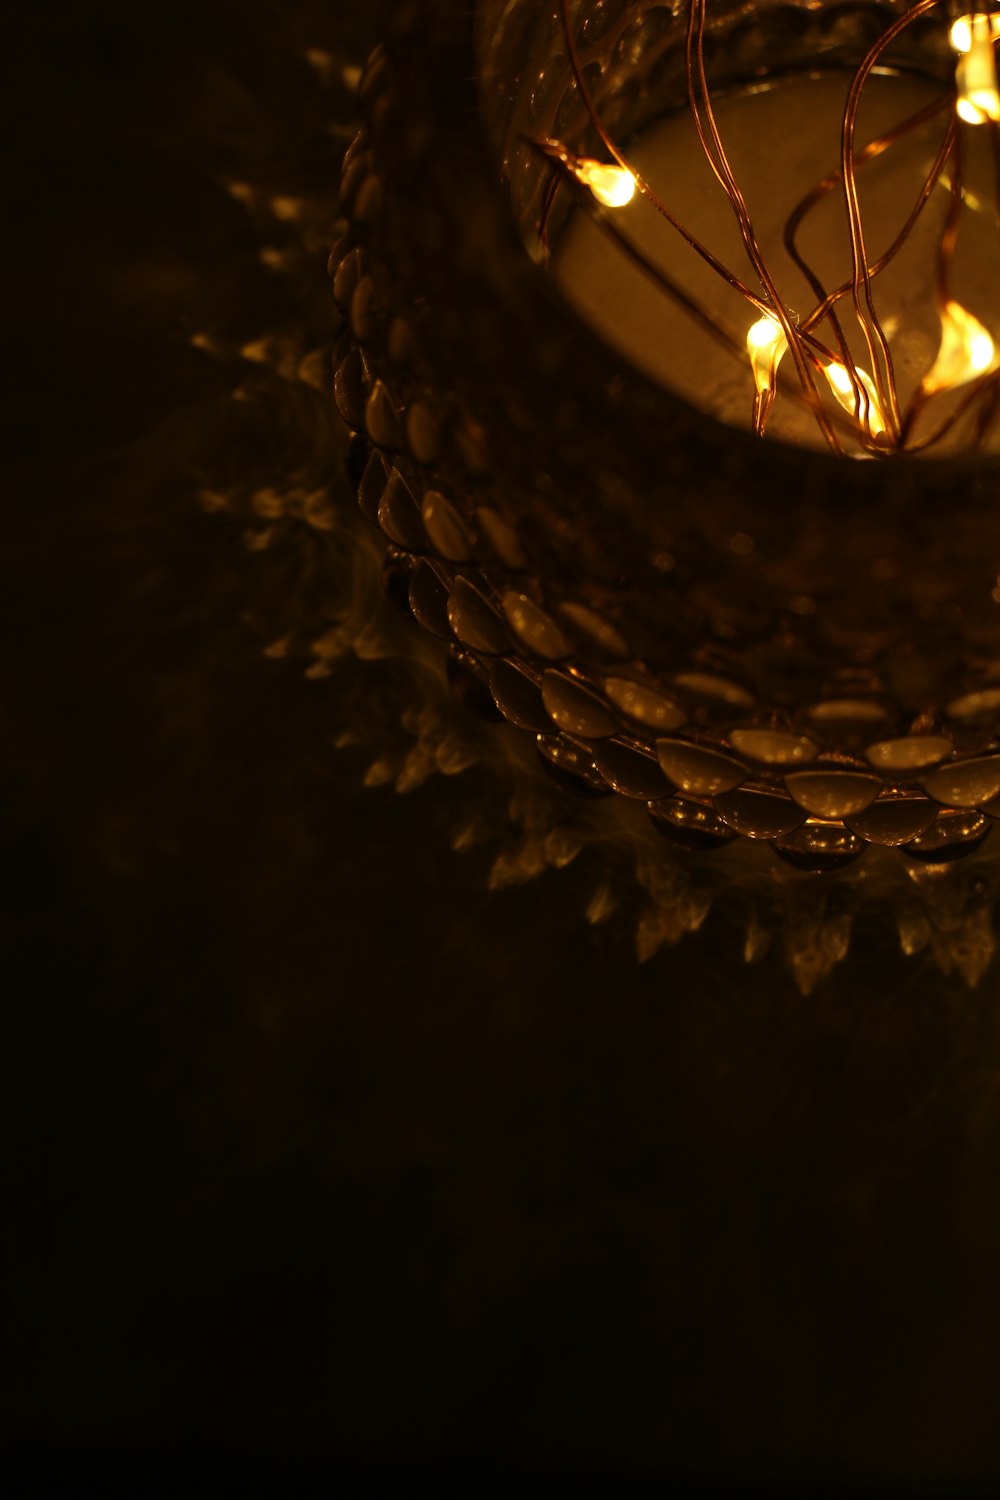 a lit candle in a basket with some lights on it